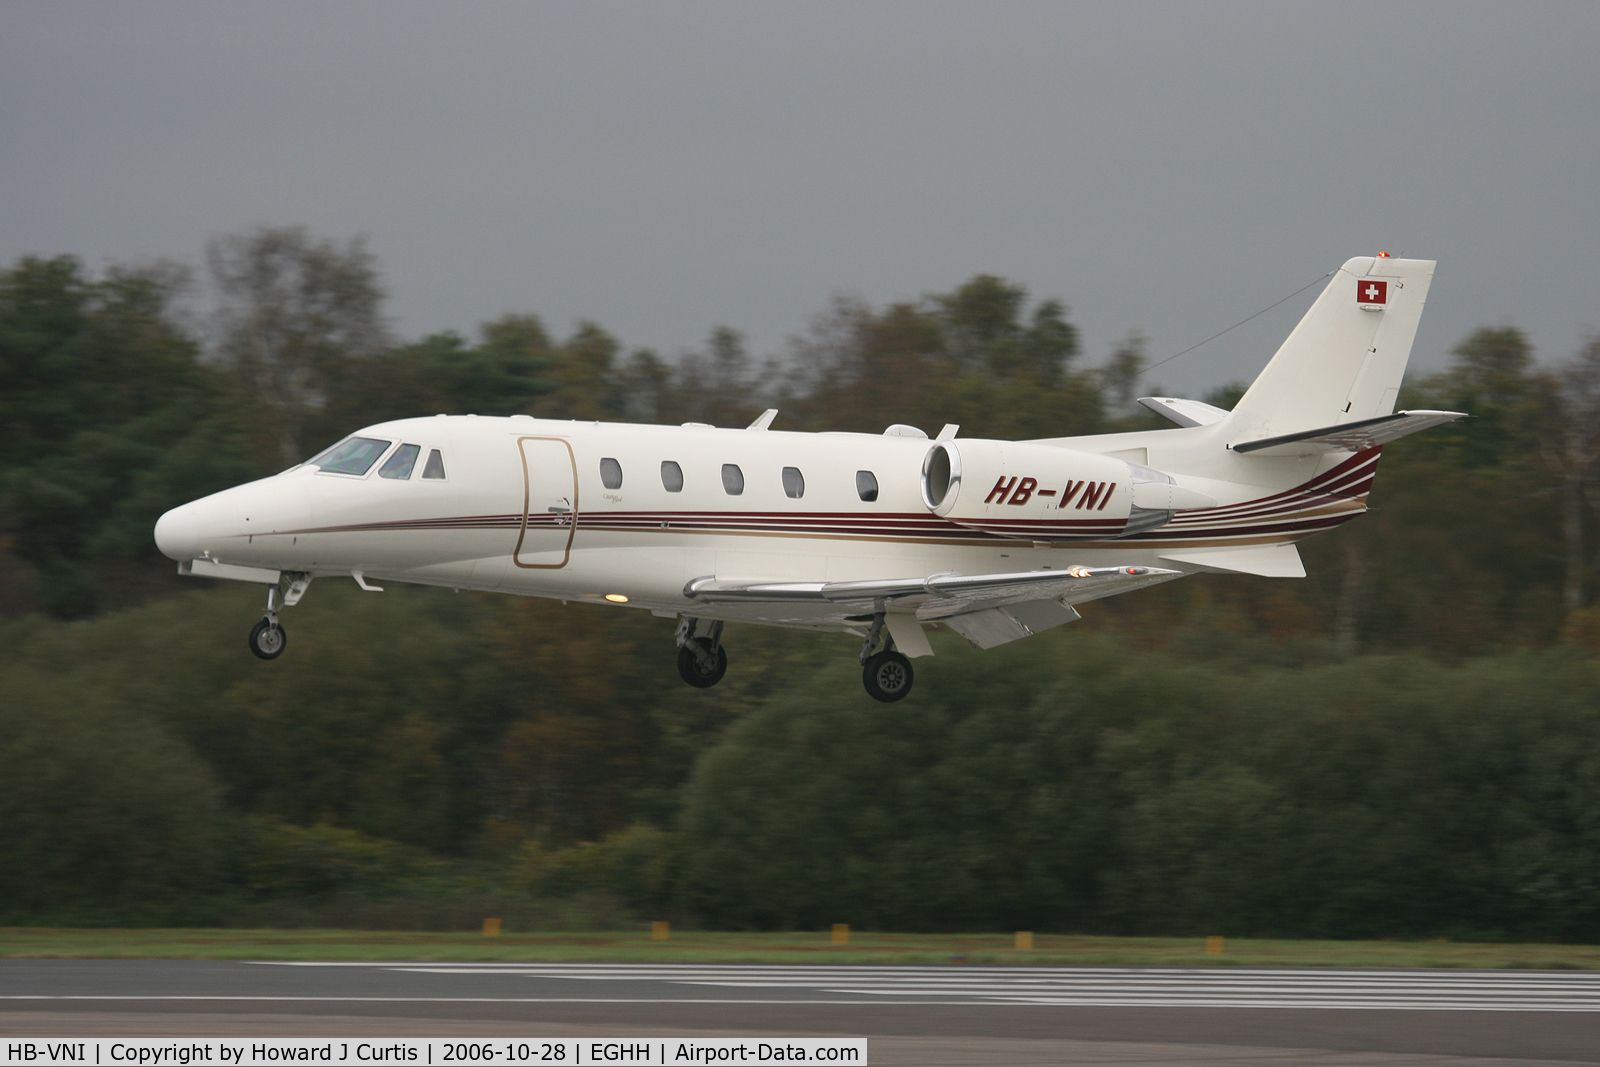 HB-VNI, 2001 Cessna 560XL Citation Excel C/N 560-5154, Just about to touch down on runway 26. Taken from the old museum viewing area.